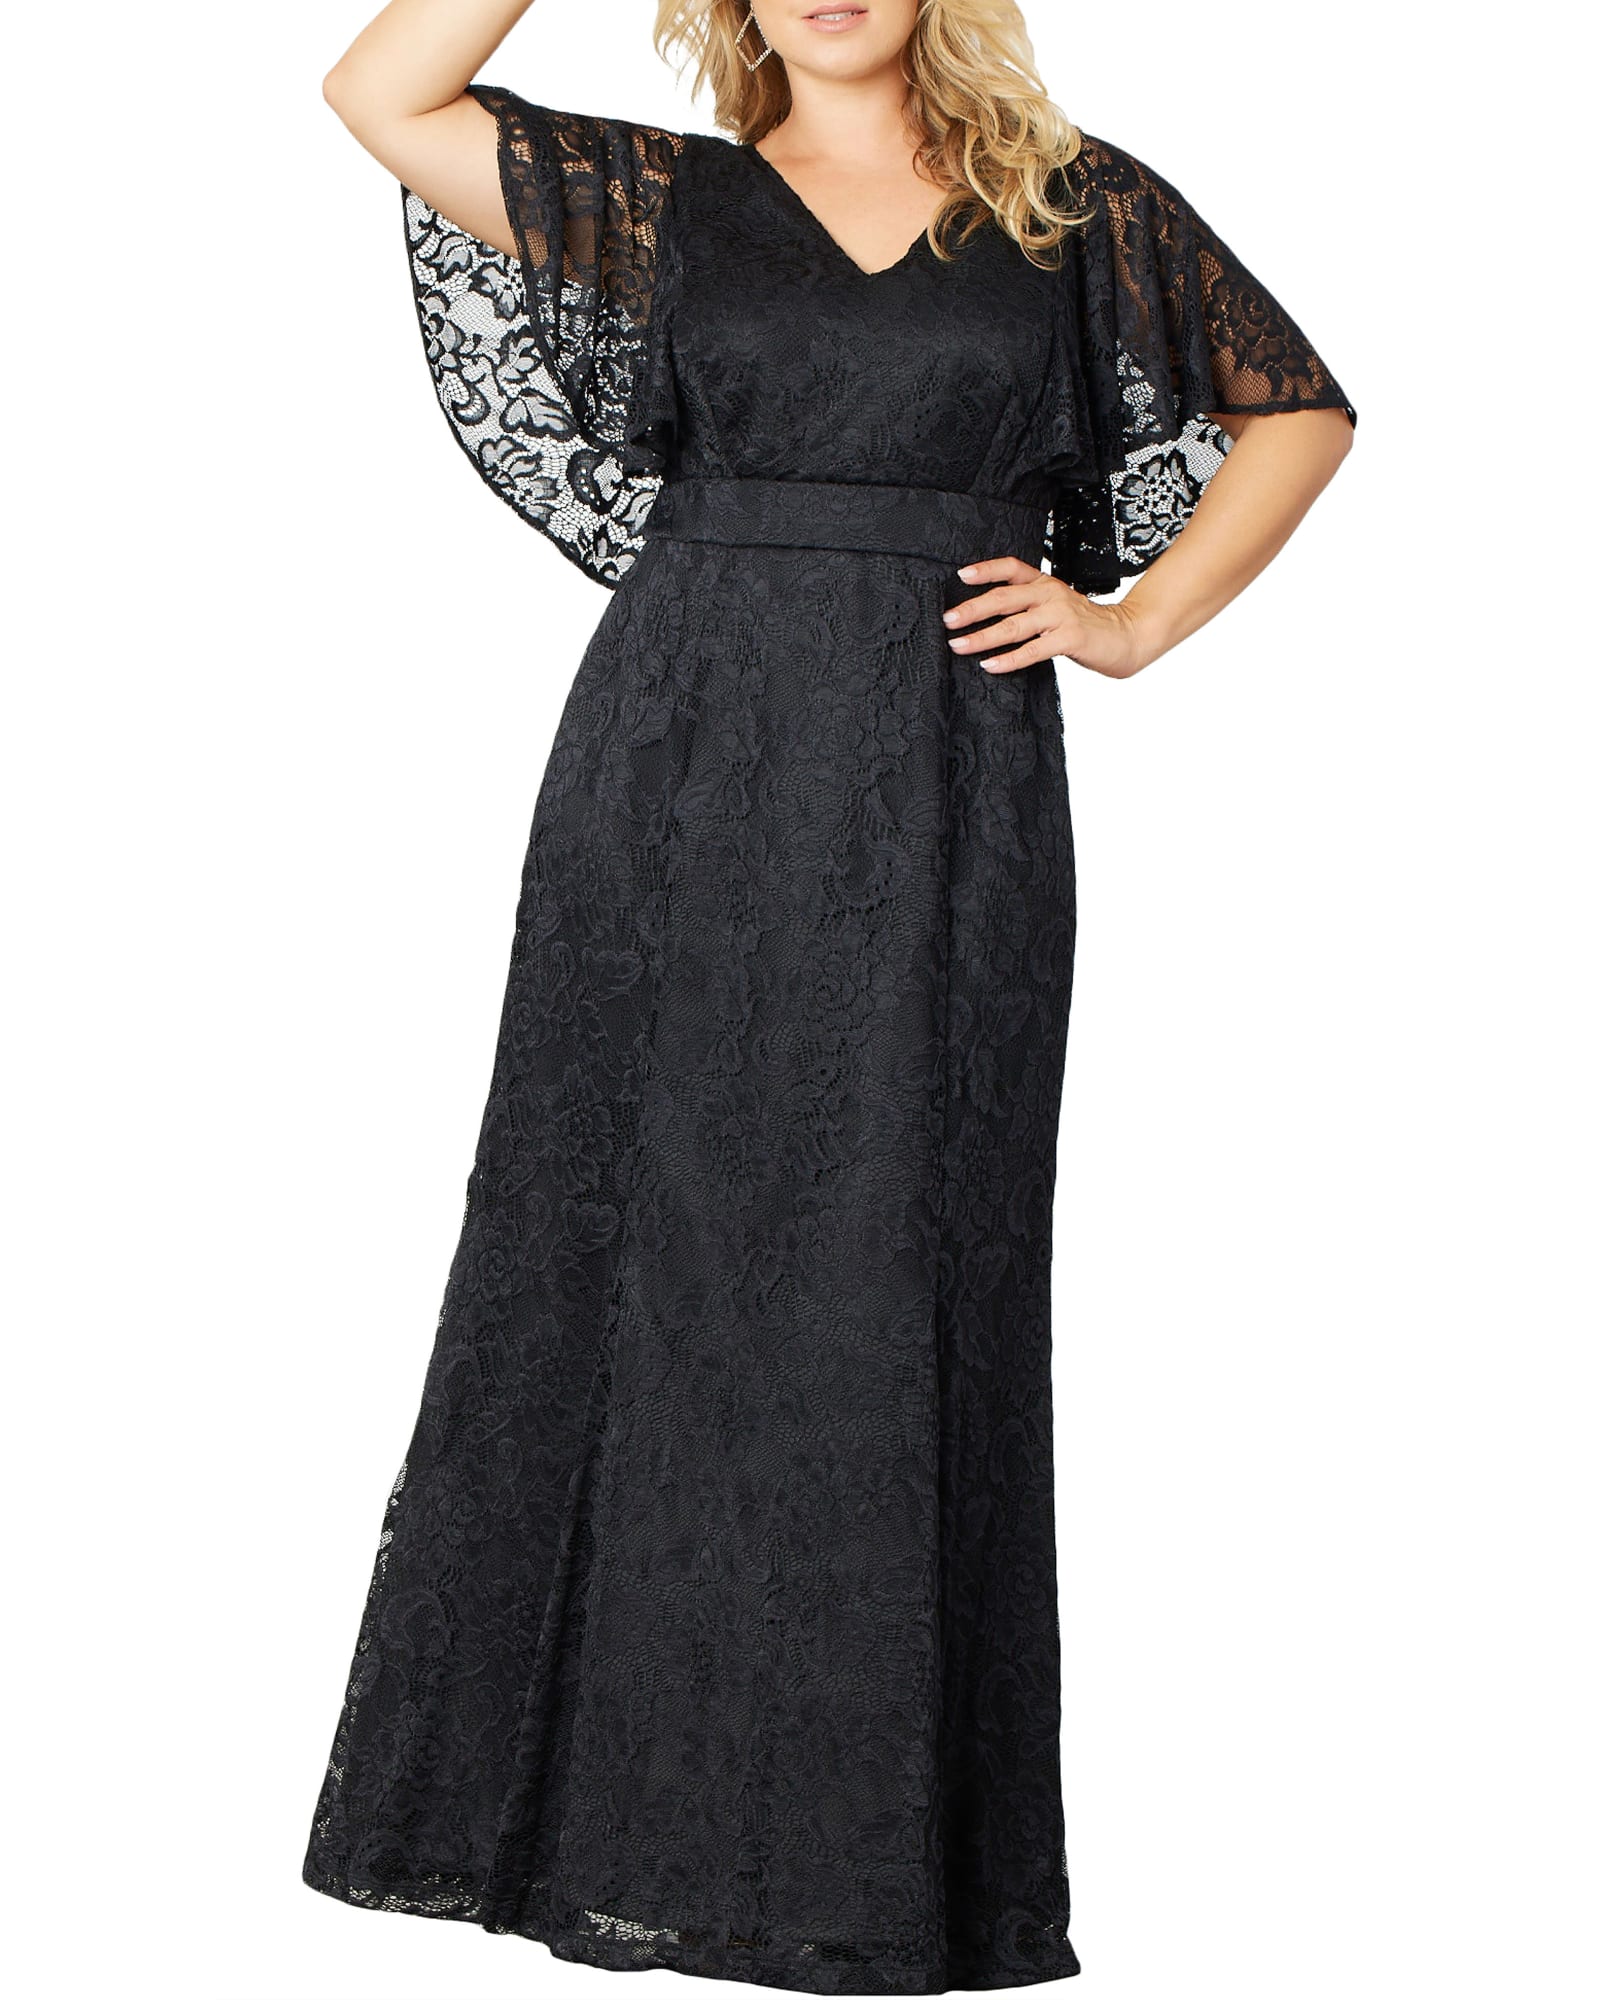 Duchess Lace Evening Gown | ONYX